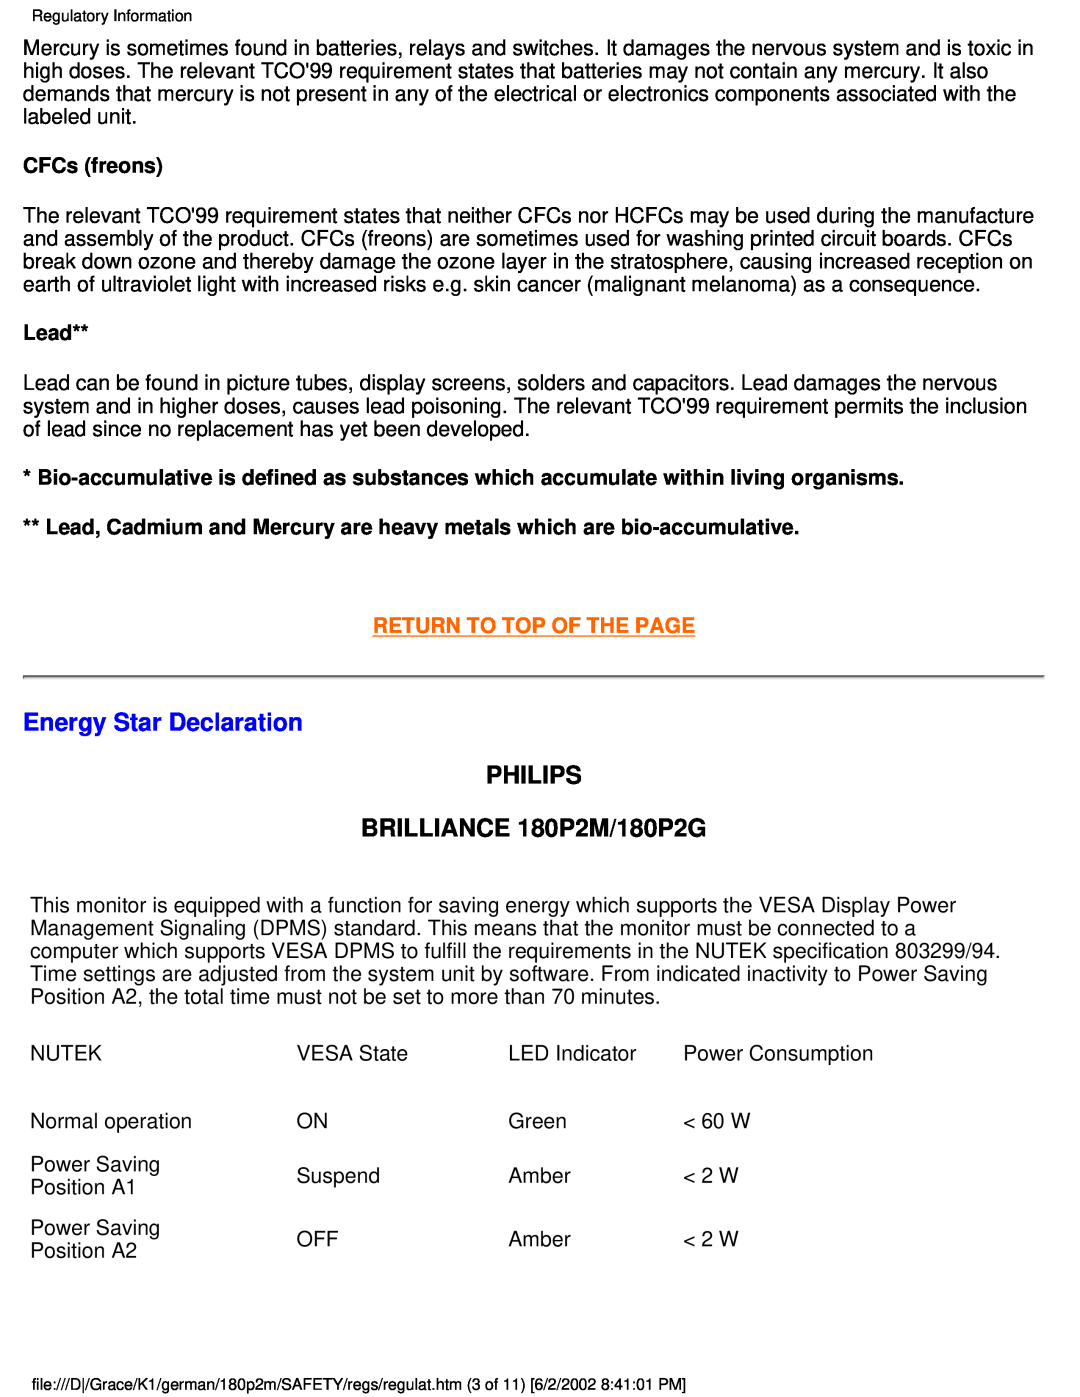 Philips user manual Energy Star Declaration, PHILIPS BRILLIANCE 180P2M/180P2G, Return To Top Of The Page 